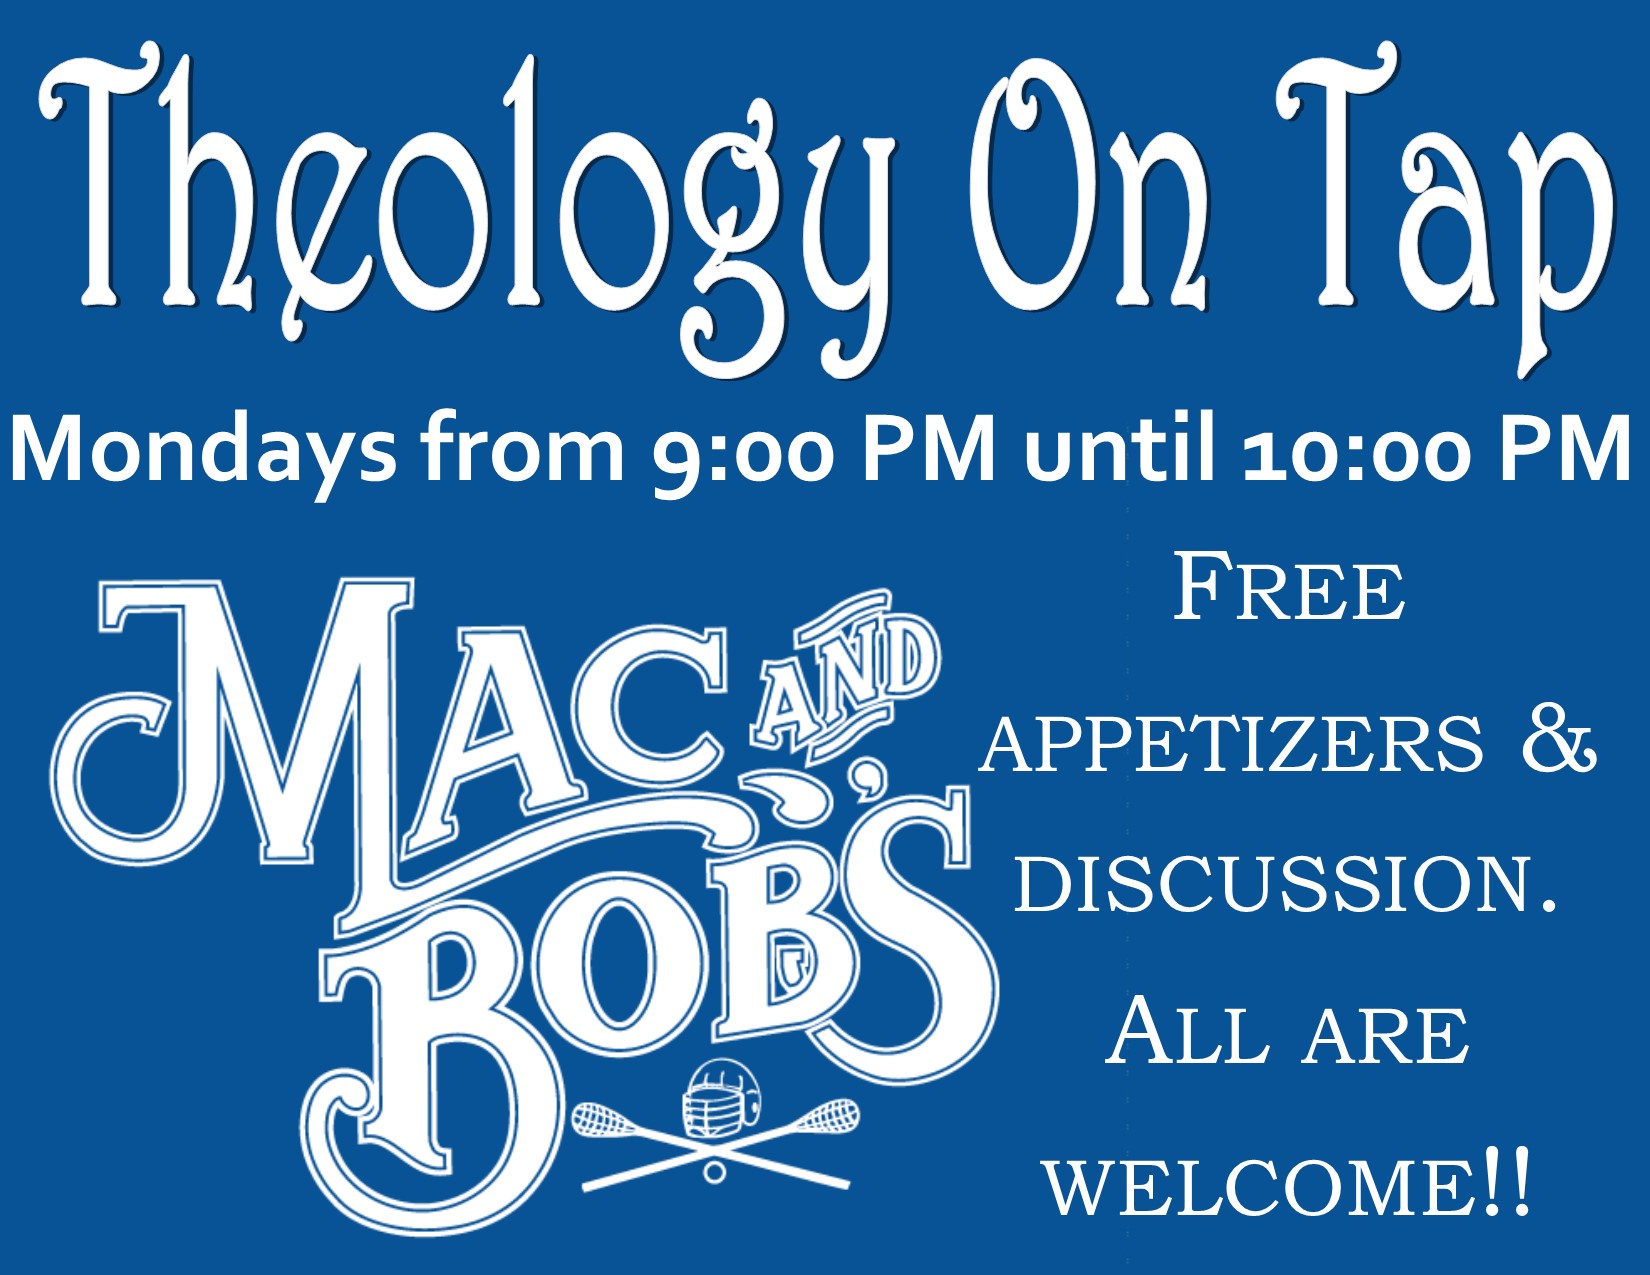 A blue image with the mac and bob's logo. Text reads "Theology on Tap, Mondays from 9:00 PM until 10:00 PM, Free appetizers & discussion, all are welcome!!"